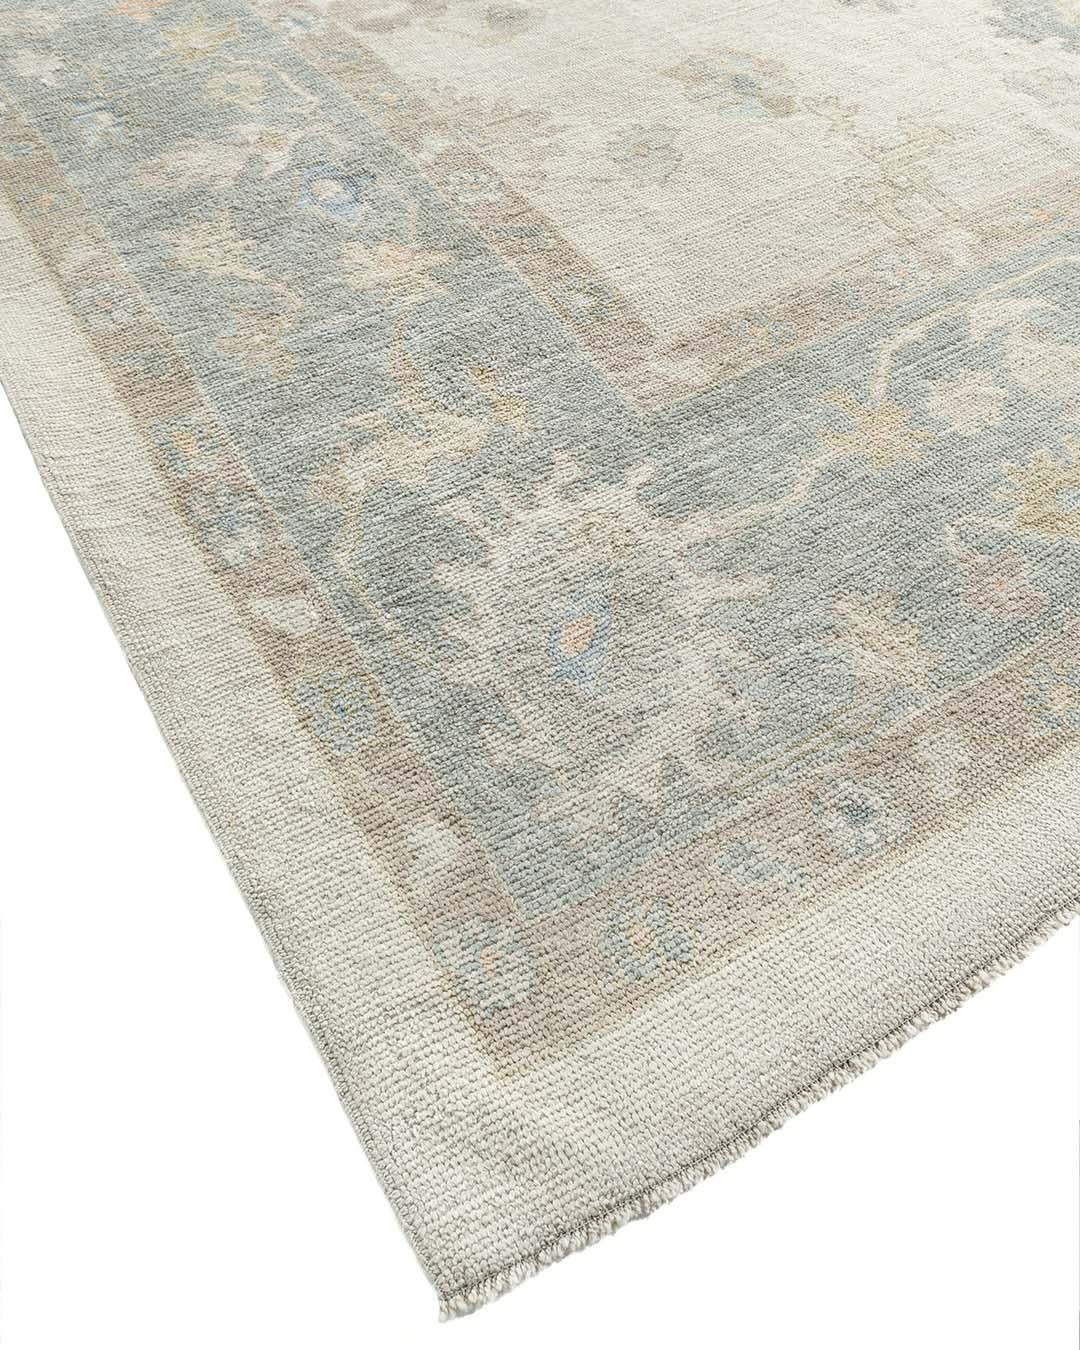 Wool Oversize Oushak Style Handwoven Carpet Rug  14'4 x 20'8 For Sale